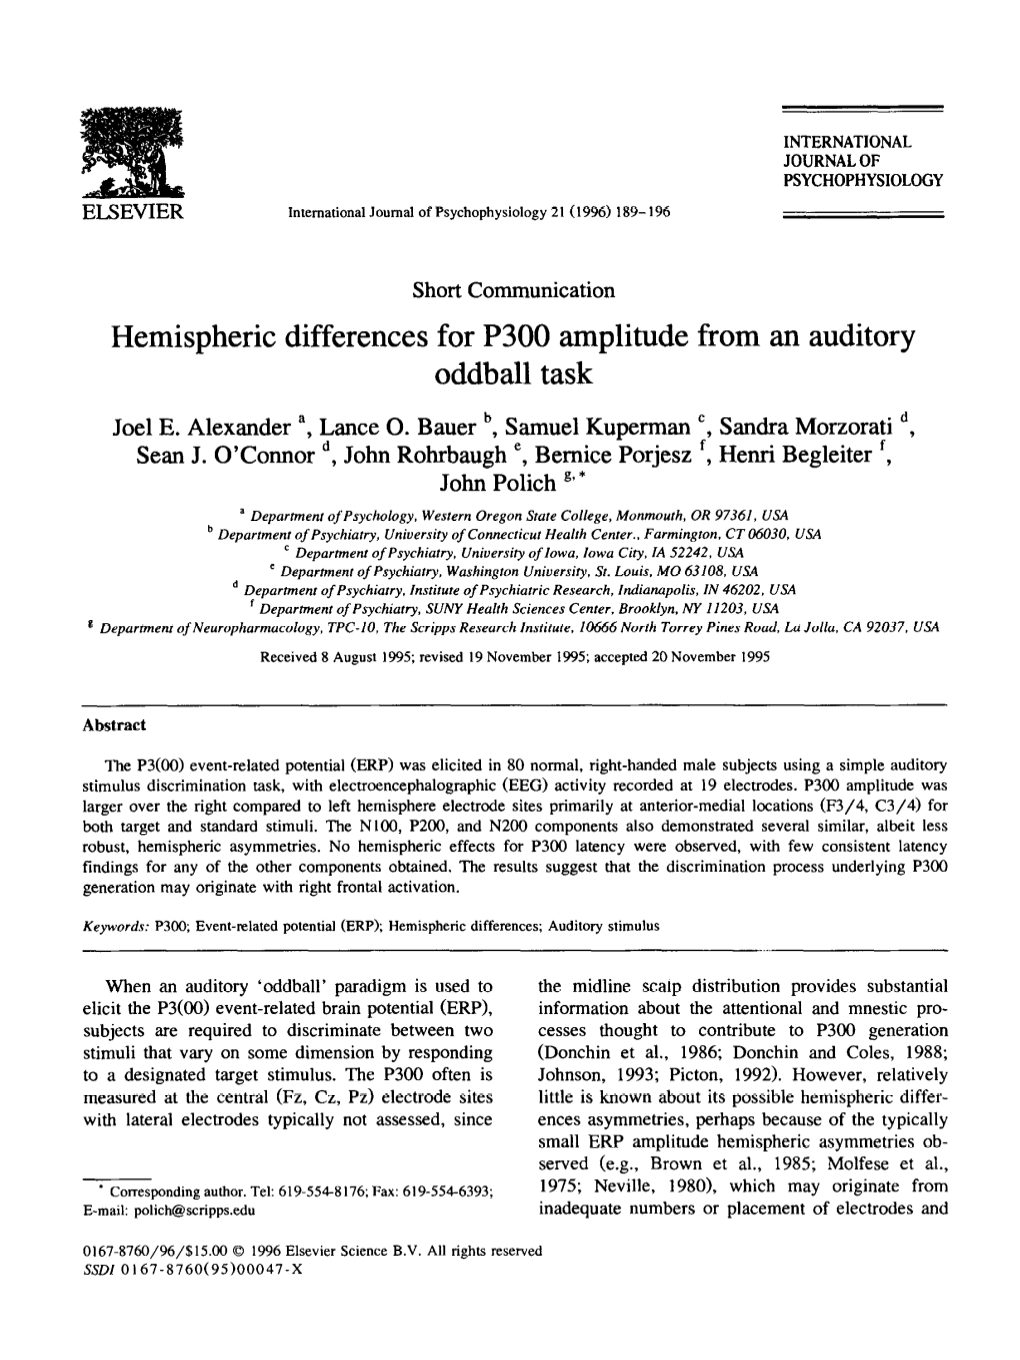 Hemispheric Differences for P300 Amplitude from an Auditory Oddball Task